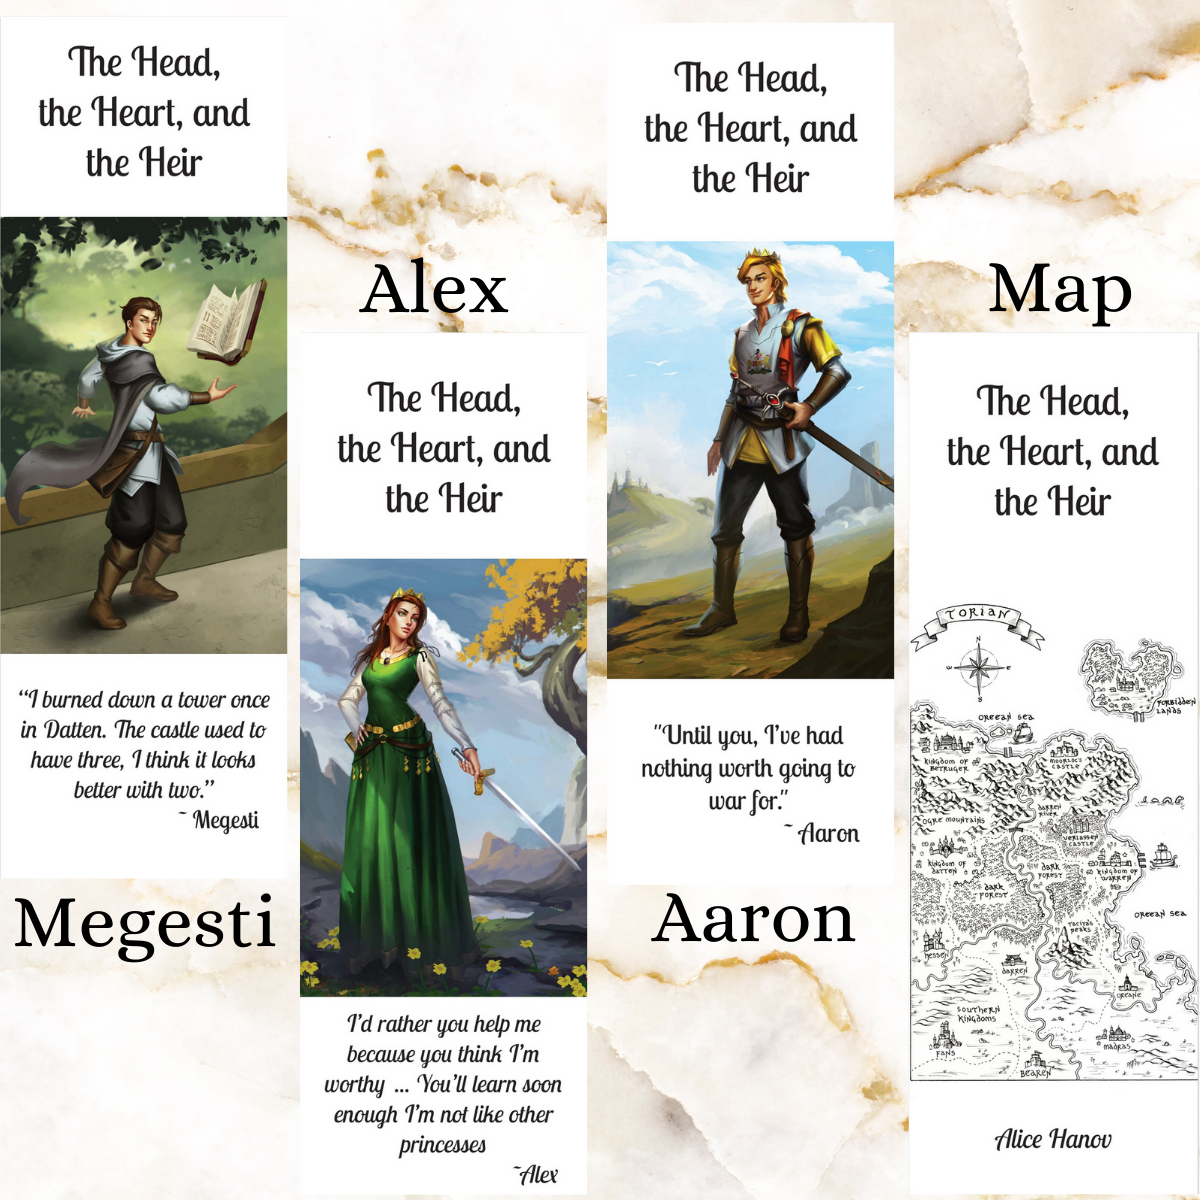 Art and examples of bookmarks - Megesti sorcerer with floating book, Alex Princess main character, Aaron prince in a princly pose, Map of the world of Torian